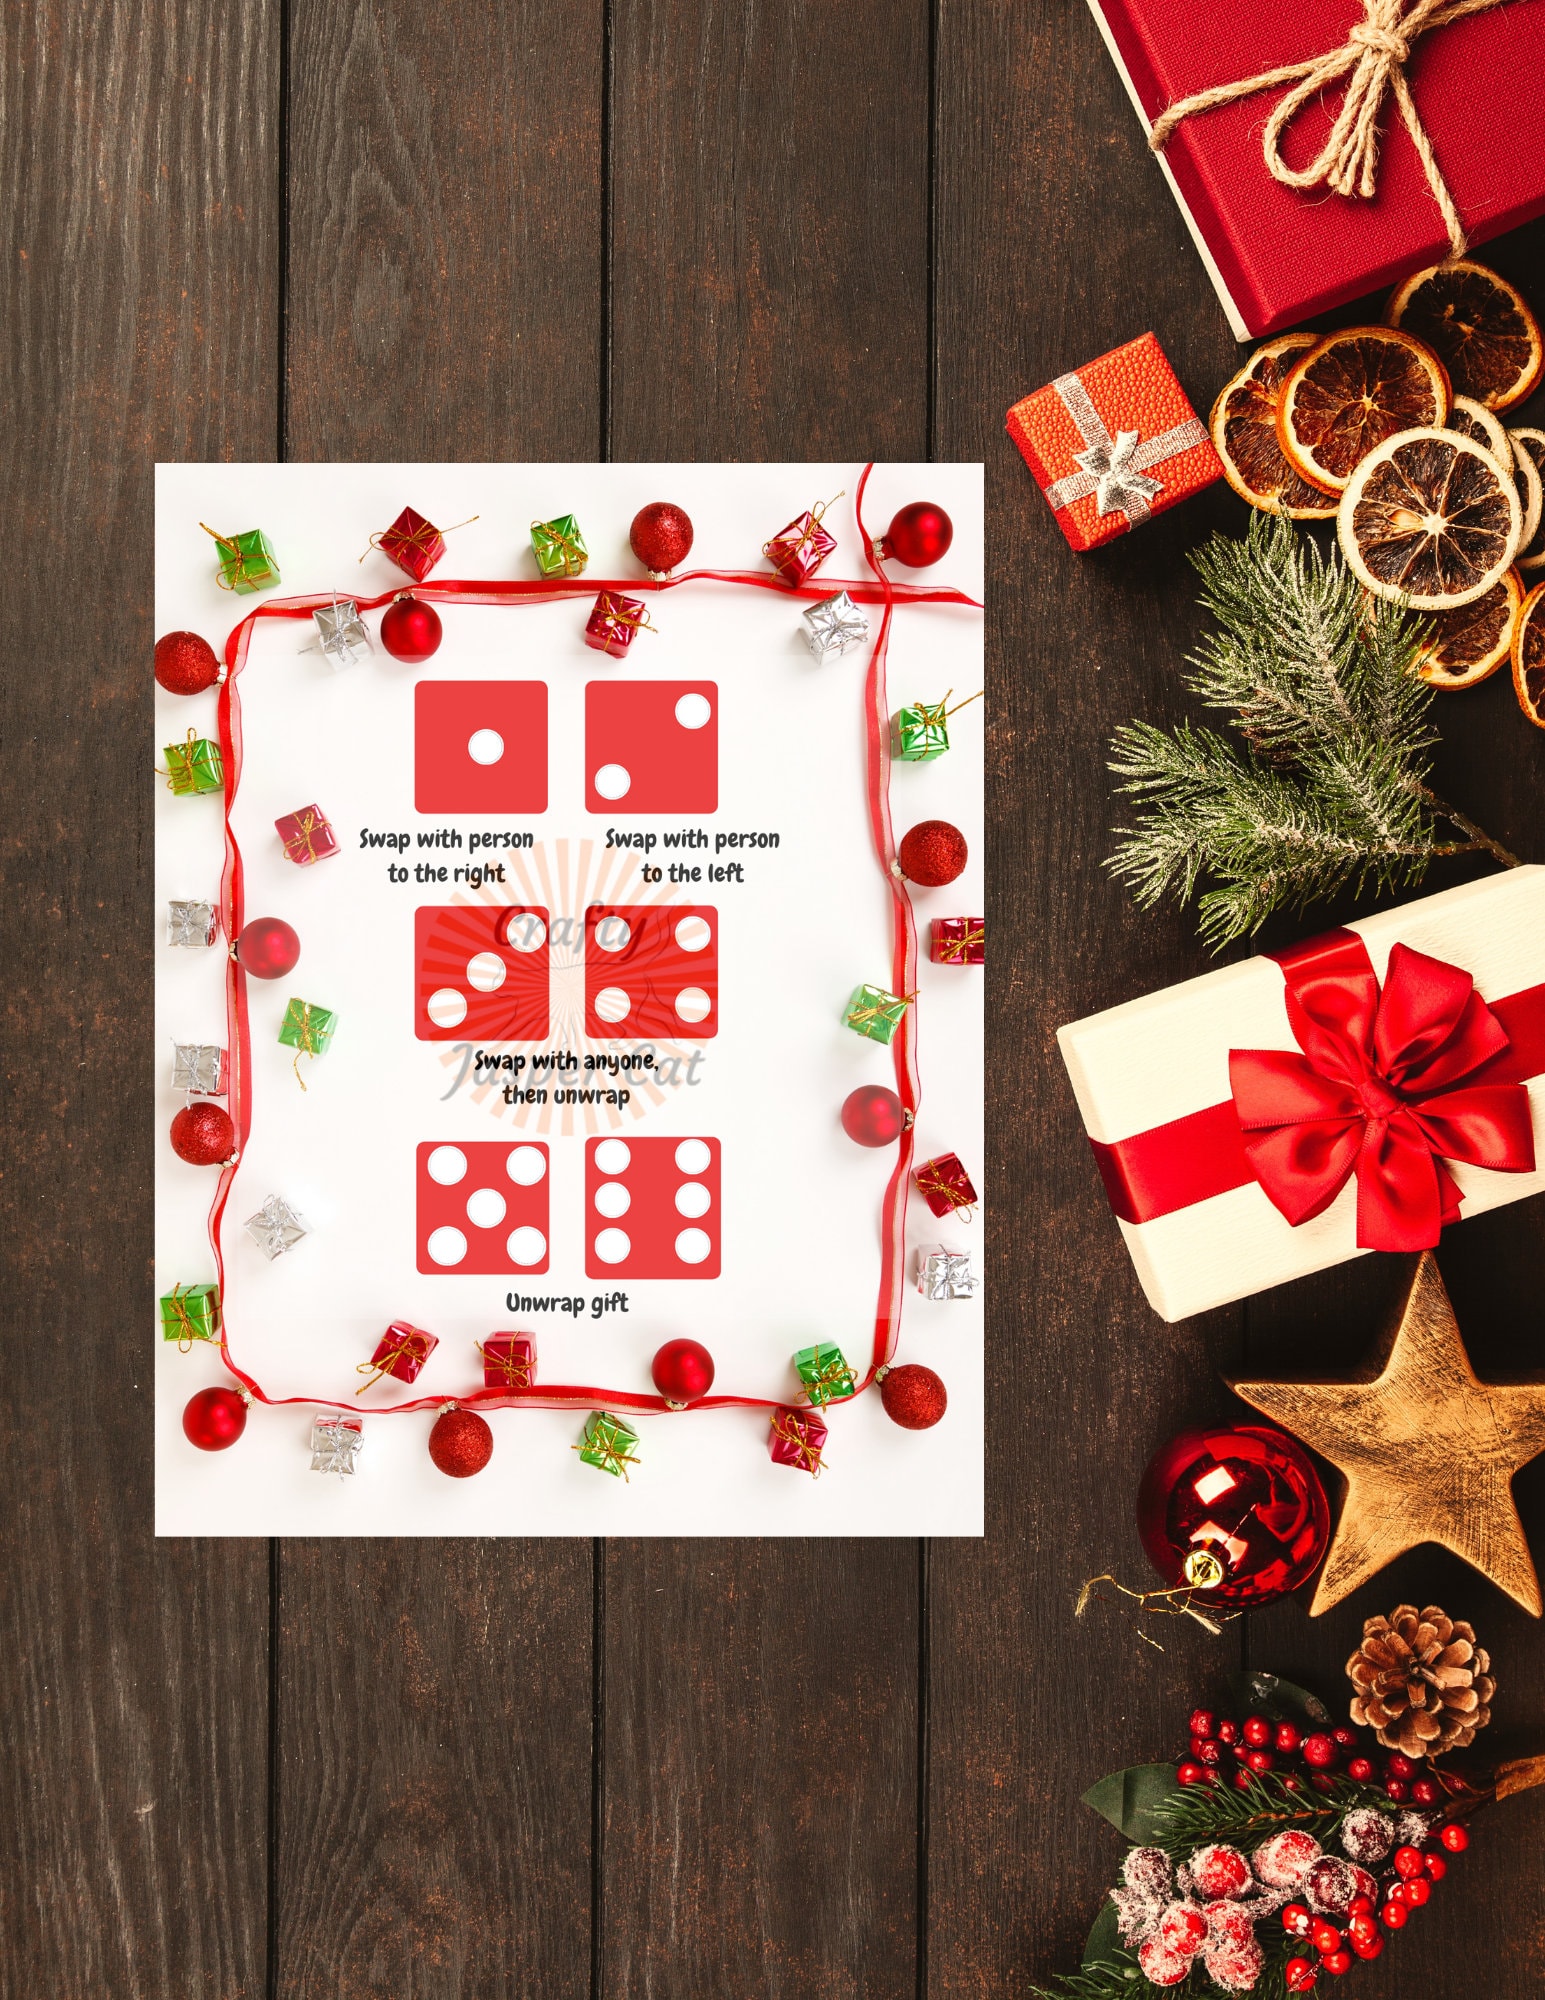 dice-gift-exchange-game-christmas-with-family-and-friends-holiday-party